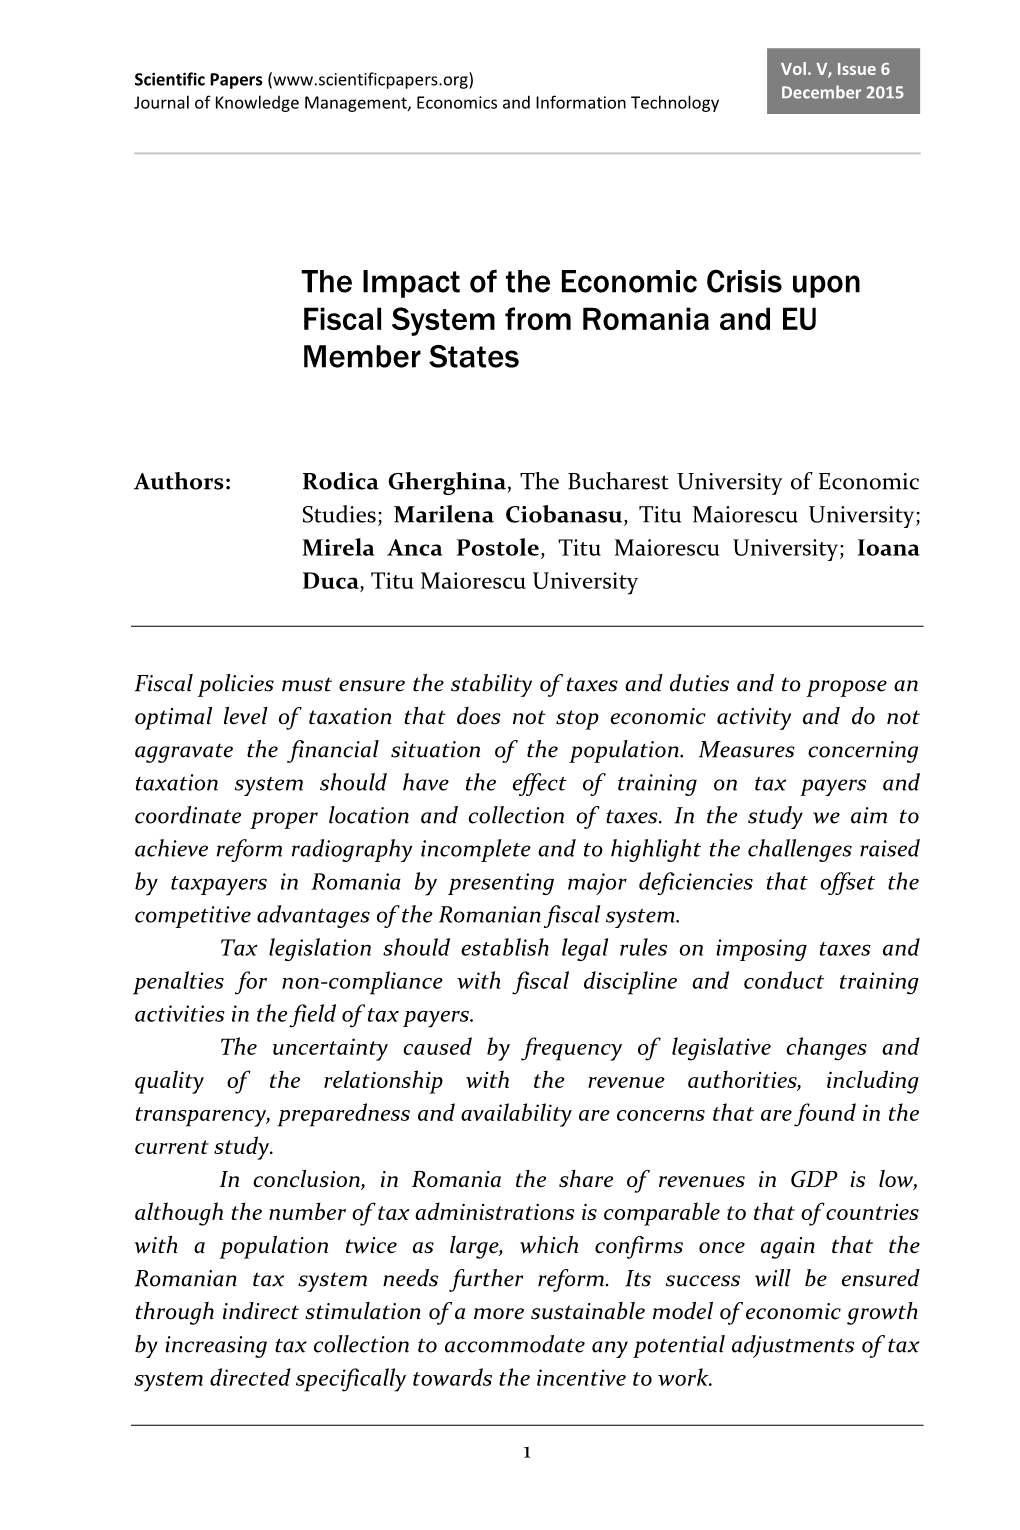 The Impact of the Economic Crisis Upon Fiscal System from Romania and EU Member States